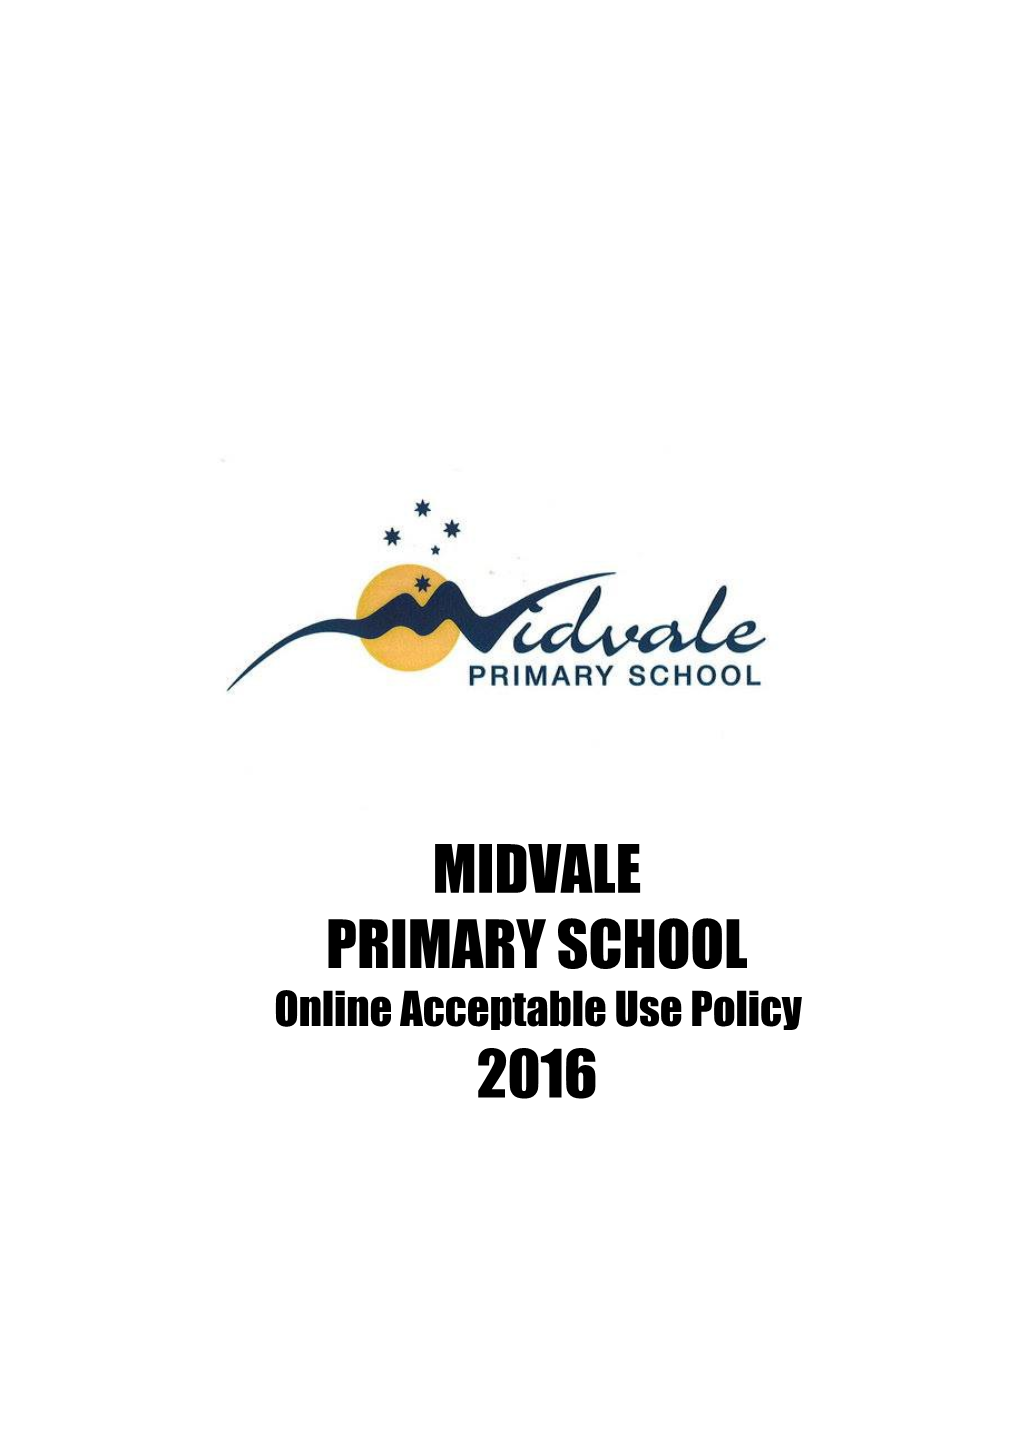 Midvale Primary School Online Acceptable Use Policy